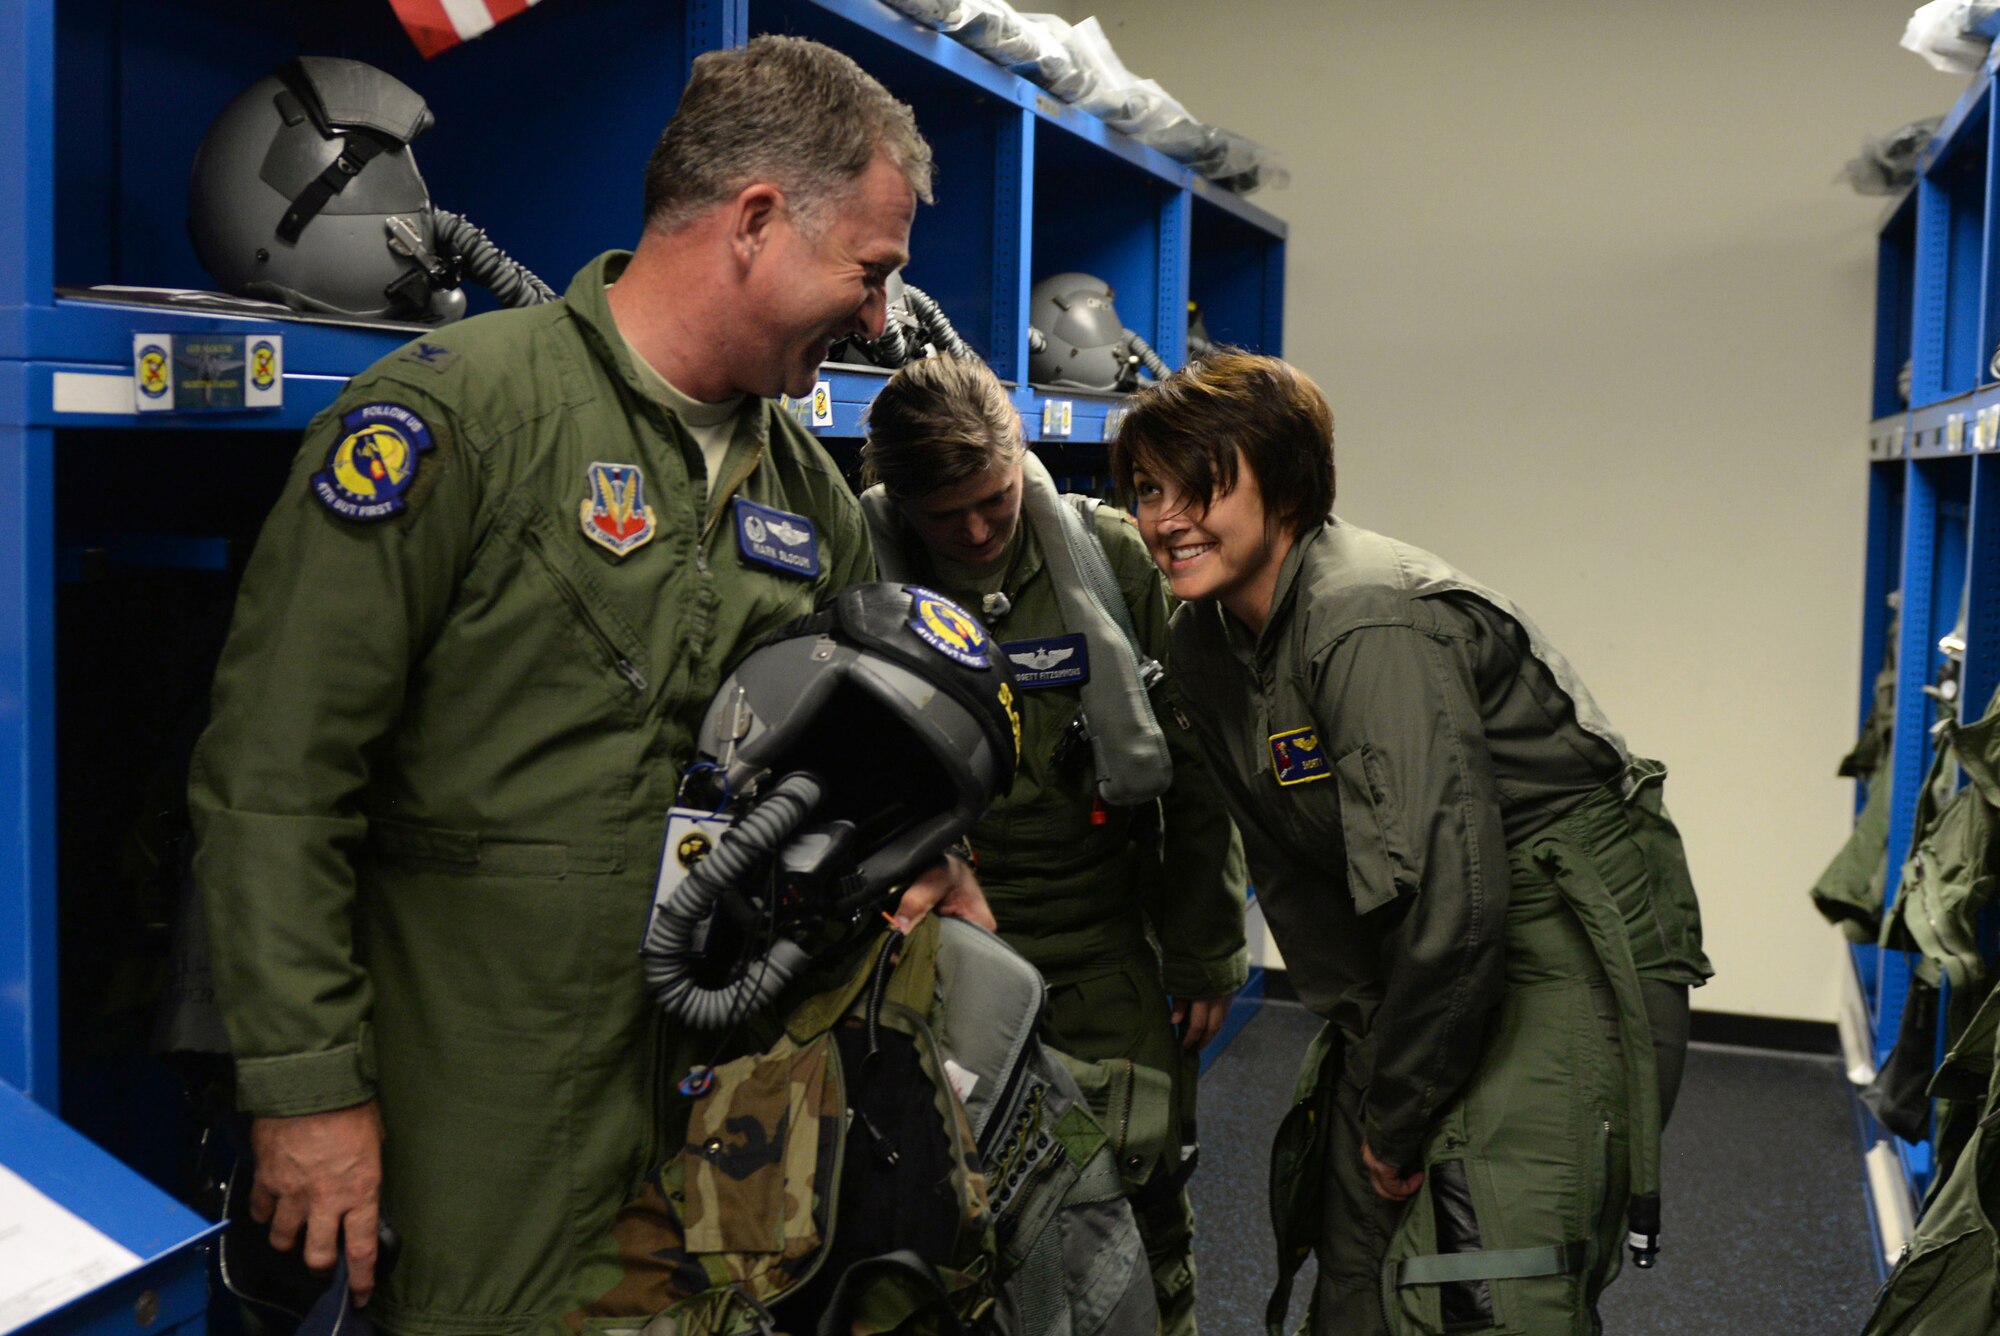 Col. Mark Slocum (left), 4th Fighter Wing commander, and Julie Daniels (right), Military Affairs Committee chairperson, don flight gear, June 14, 2016, at Seymour Johnson Air Force Base, North Carolina. Daniels addresses the needs and concerns of the base to help enhance the communication and relations between the base and Goldsboro community. (U.S. Air Force photo by Airman 1st Class Ashley Williamson/Released)